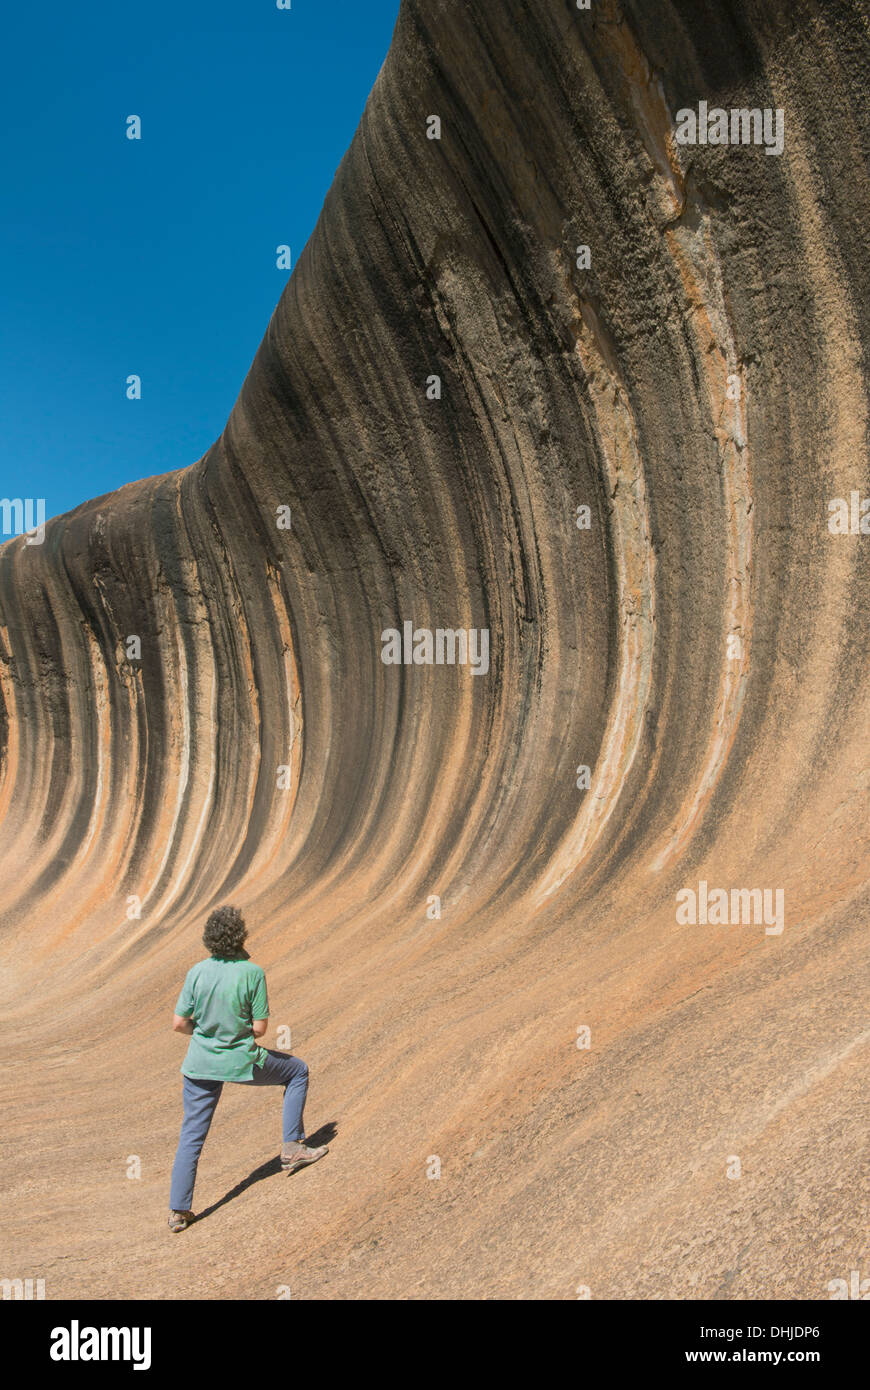 Wave Rock, geological attraction, Hyden, Western Australia, with woman viewer Stock Photo